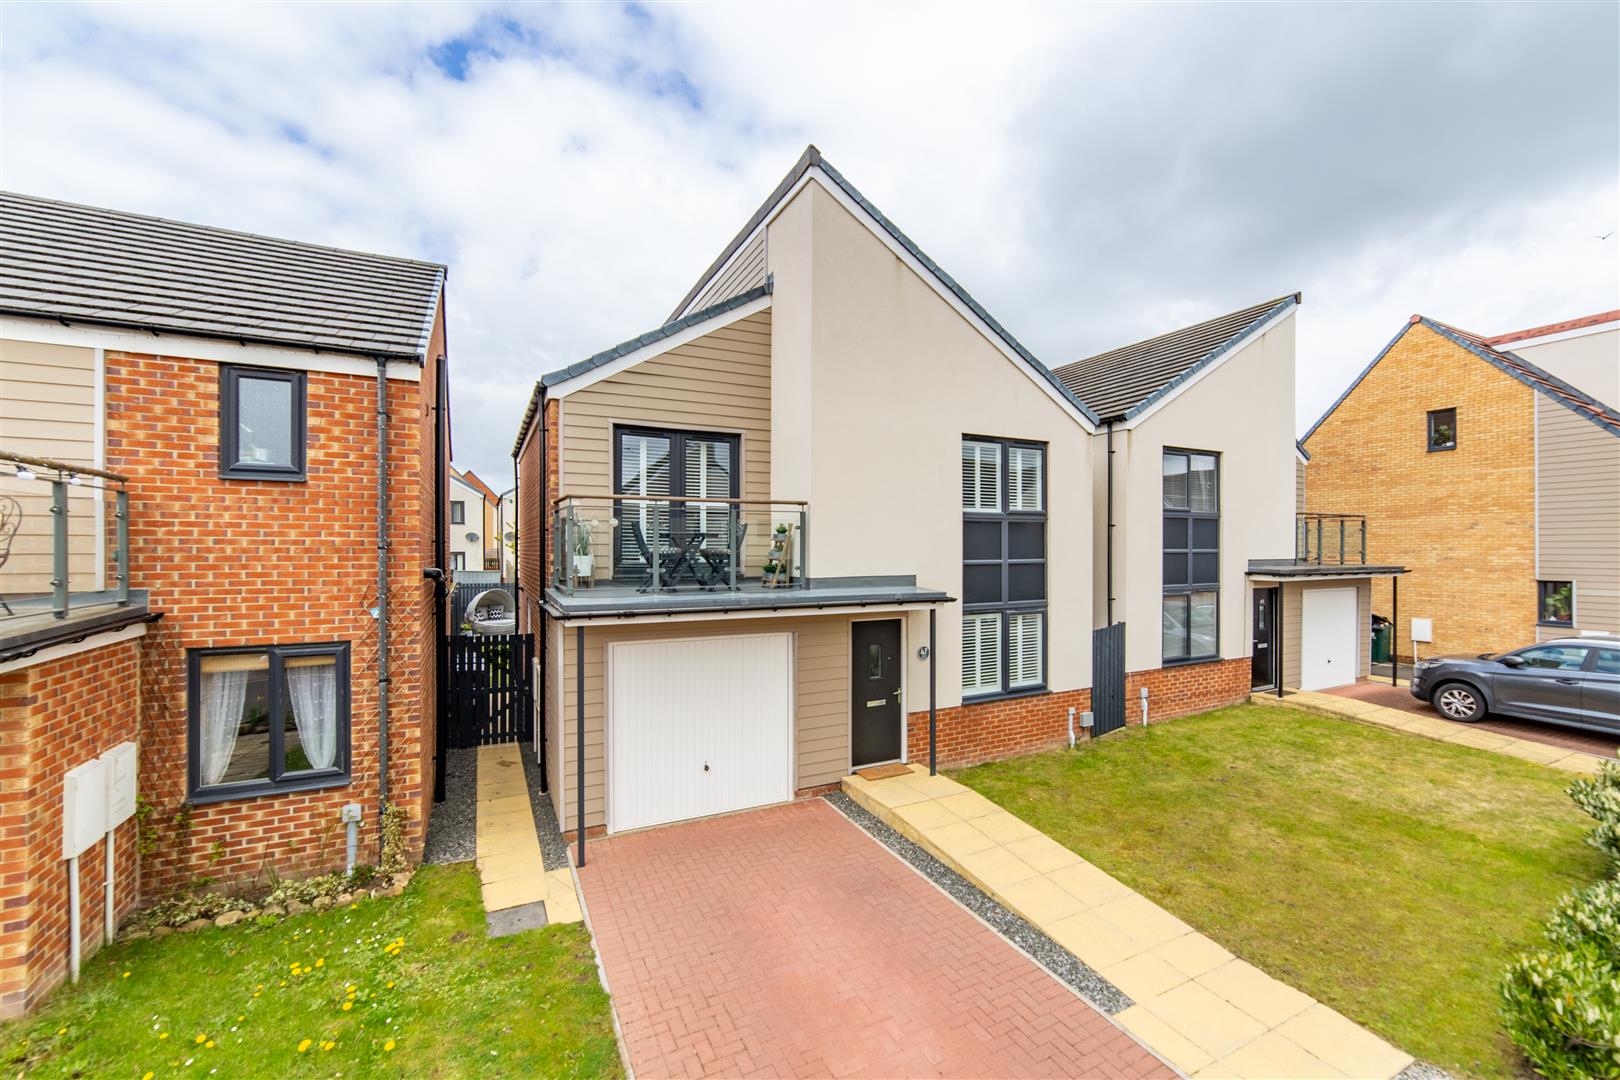 4 bed detached house for sale in Bridget Gardens, Great Park 0